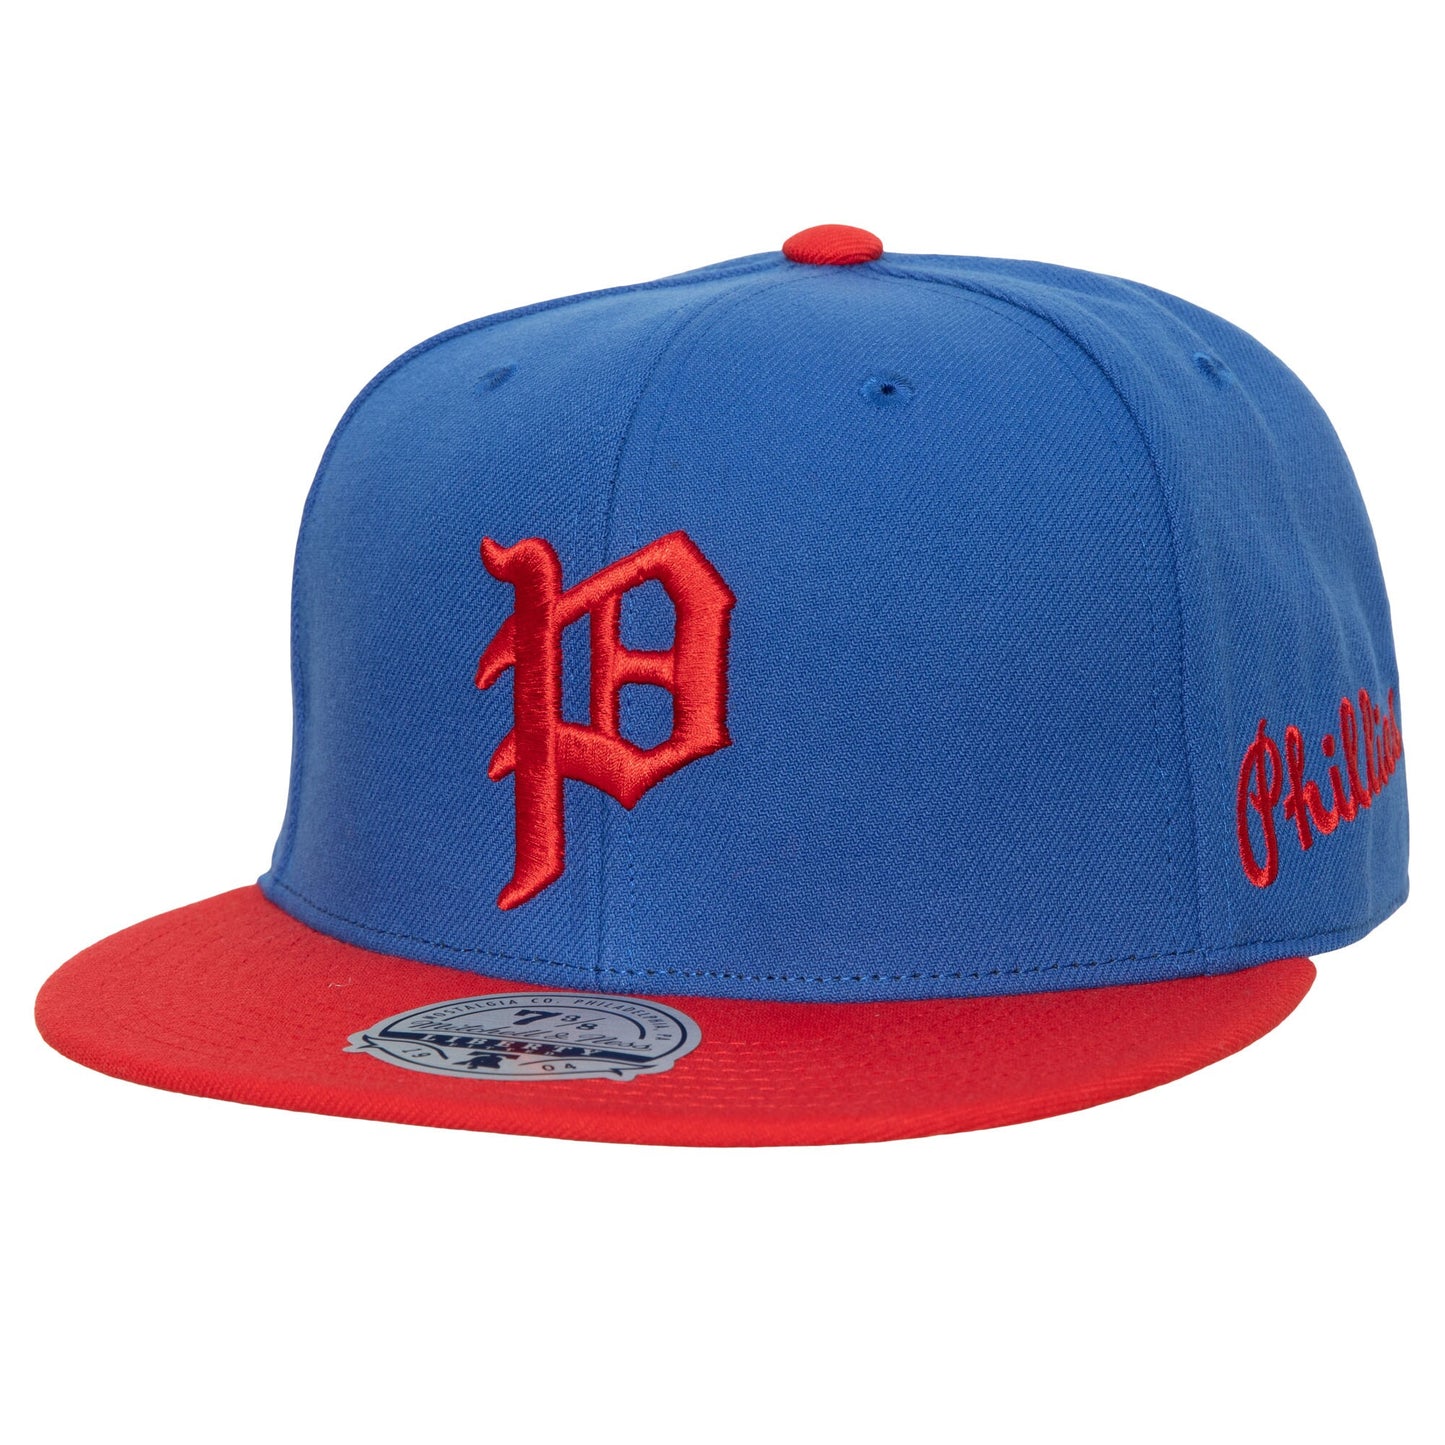 Philadelphia Phillies Mitchell & Ness Bases Loaded Fitted Hat - Royal/Red